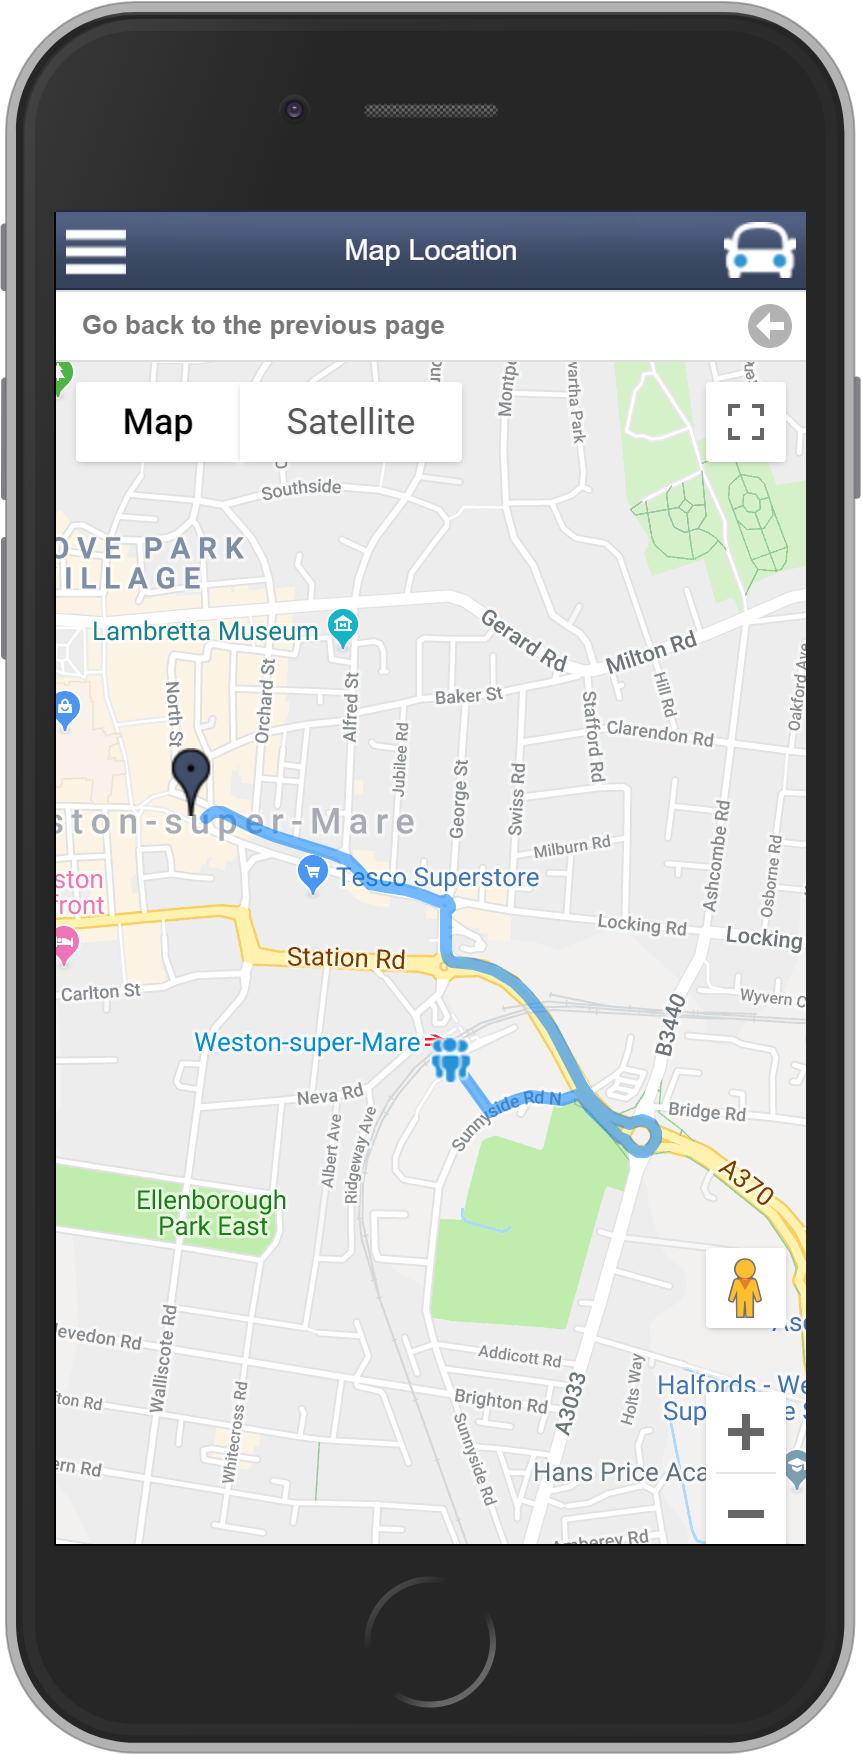 Salestracker Mobile Route Planner Map View